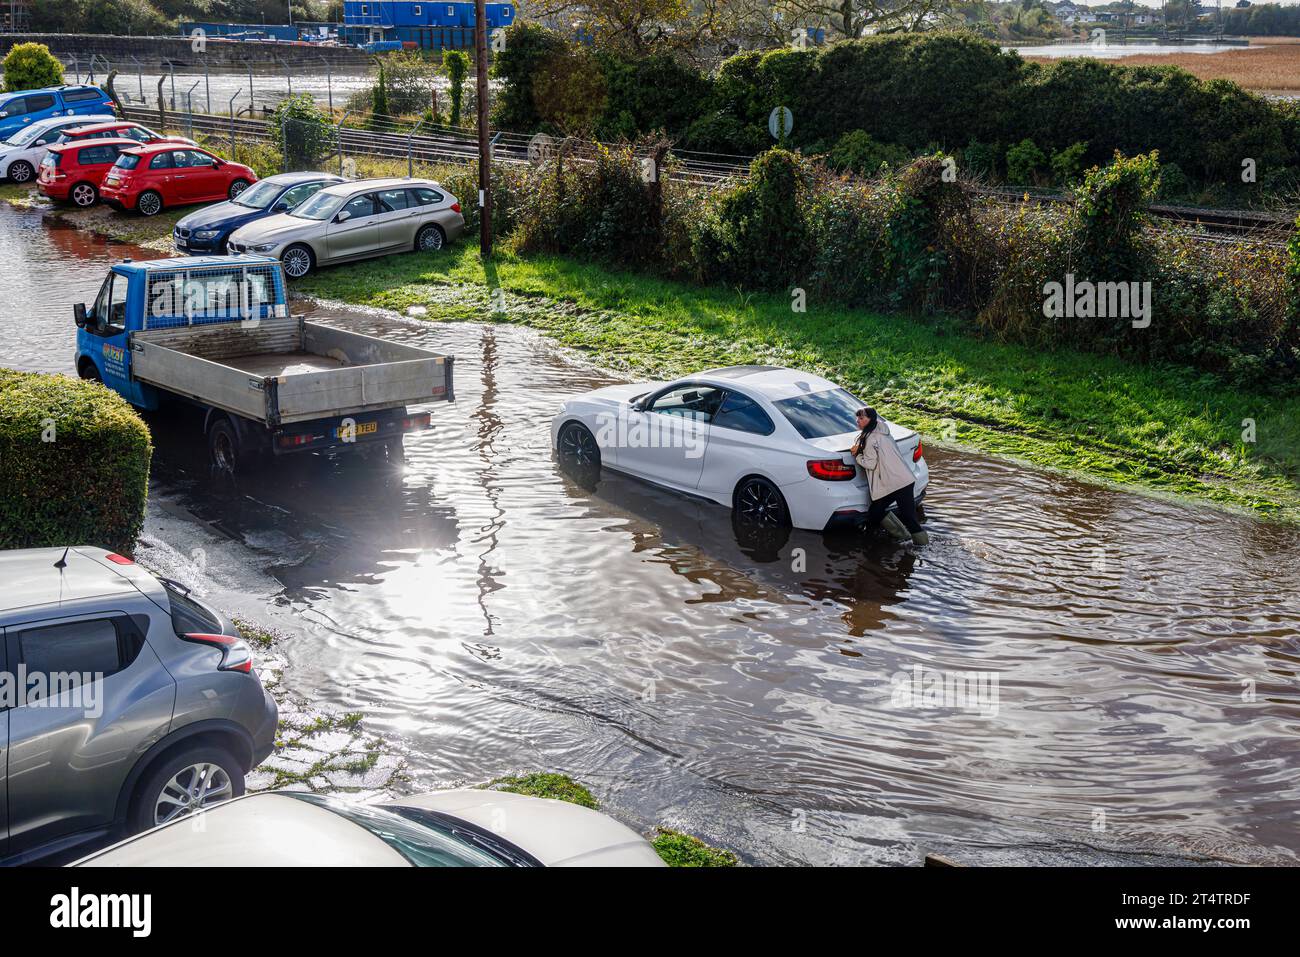 A woman pushes a broken down white BMW car stranded in a flooded road after heavy rainfall and high tide on the River Test estuary in Southampton Stock Photo